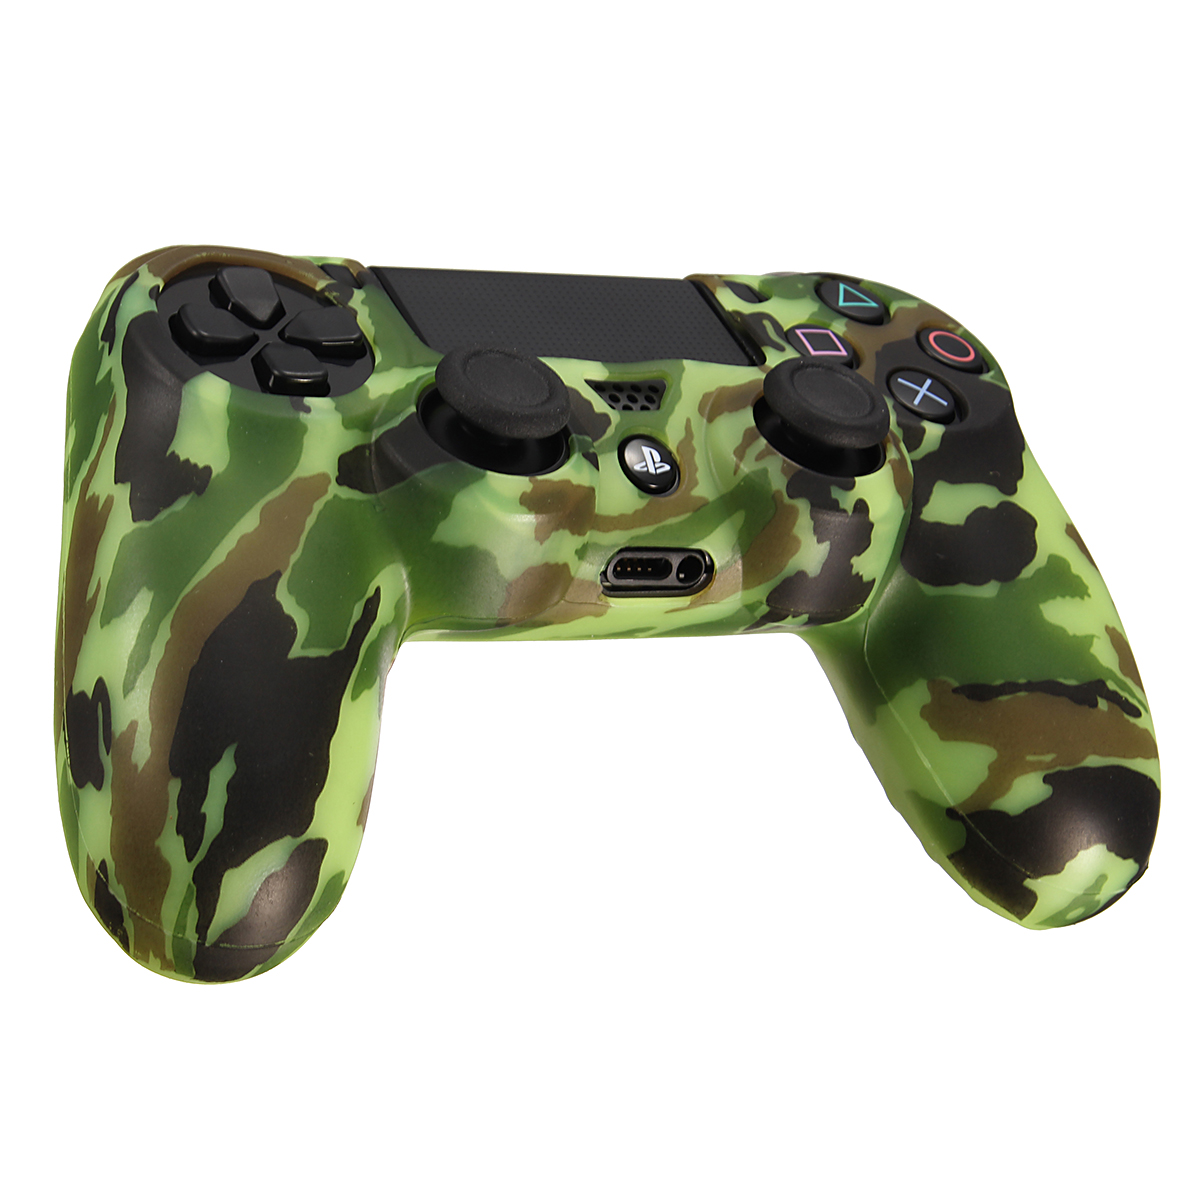 Durable Decal Camouflage Grip Cover Case Silicone Rubber Soft Skin Protector for Playstation 4 for Dualshock 4 Gamepad 50